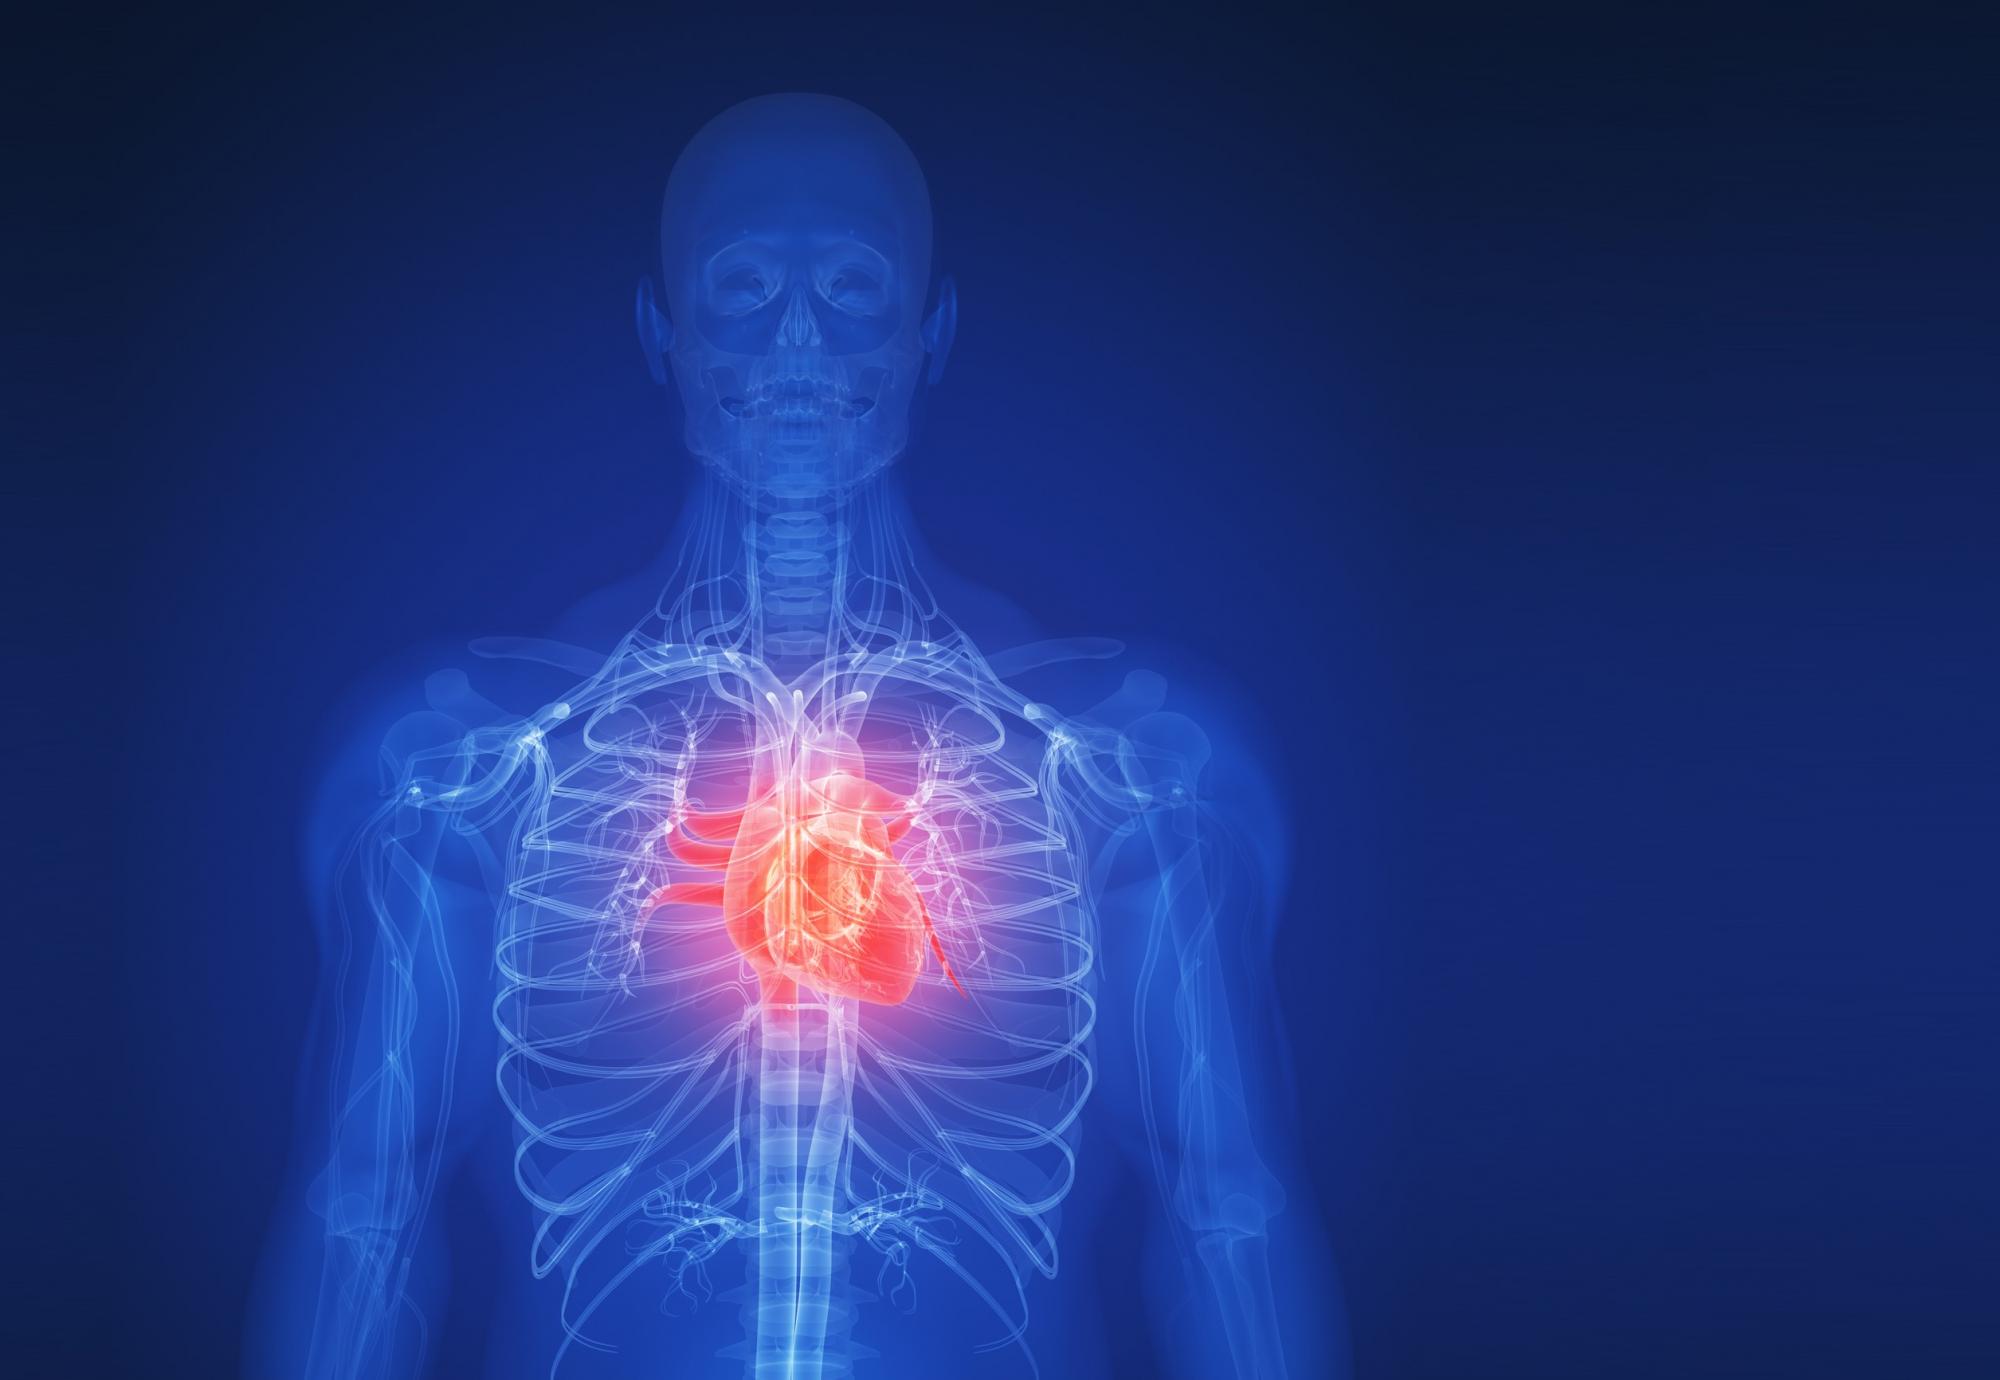 Wireframe illustration of the human body with the heart highlighted